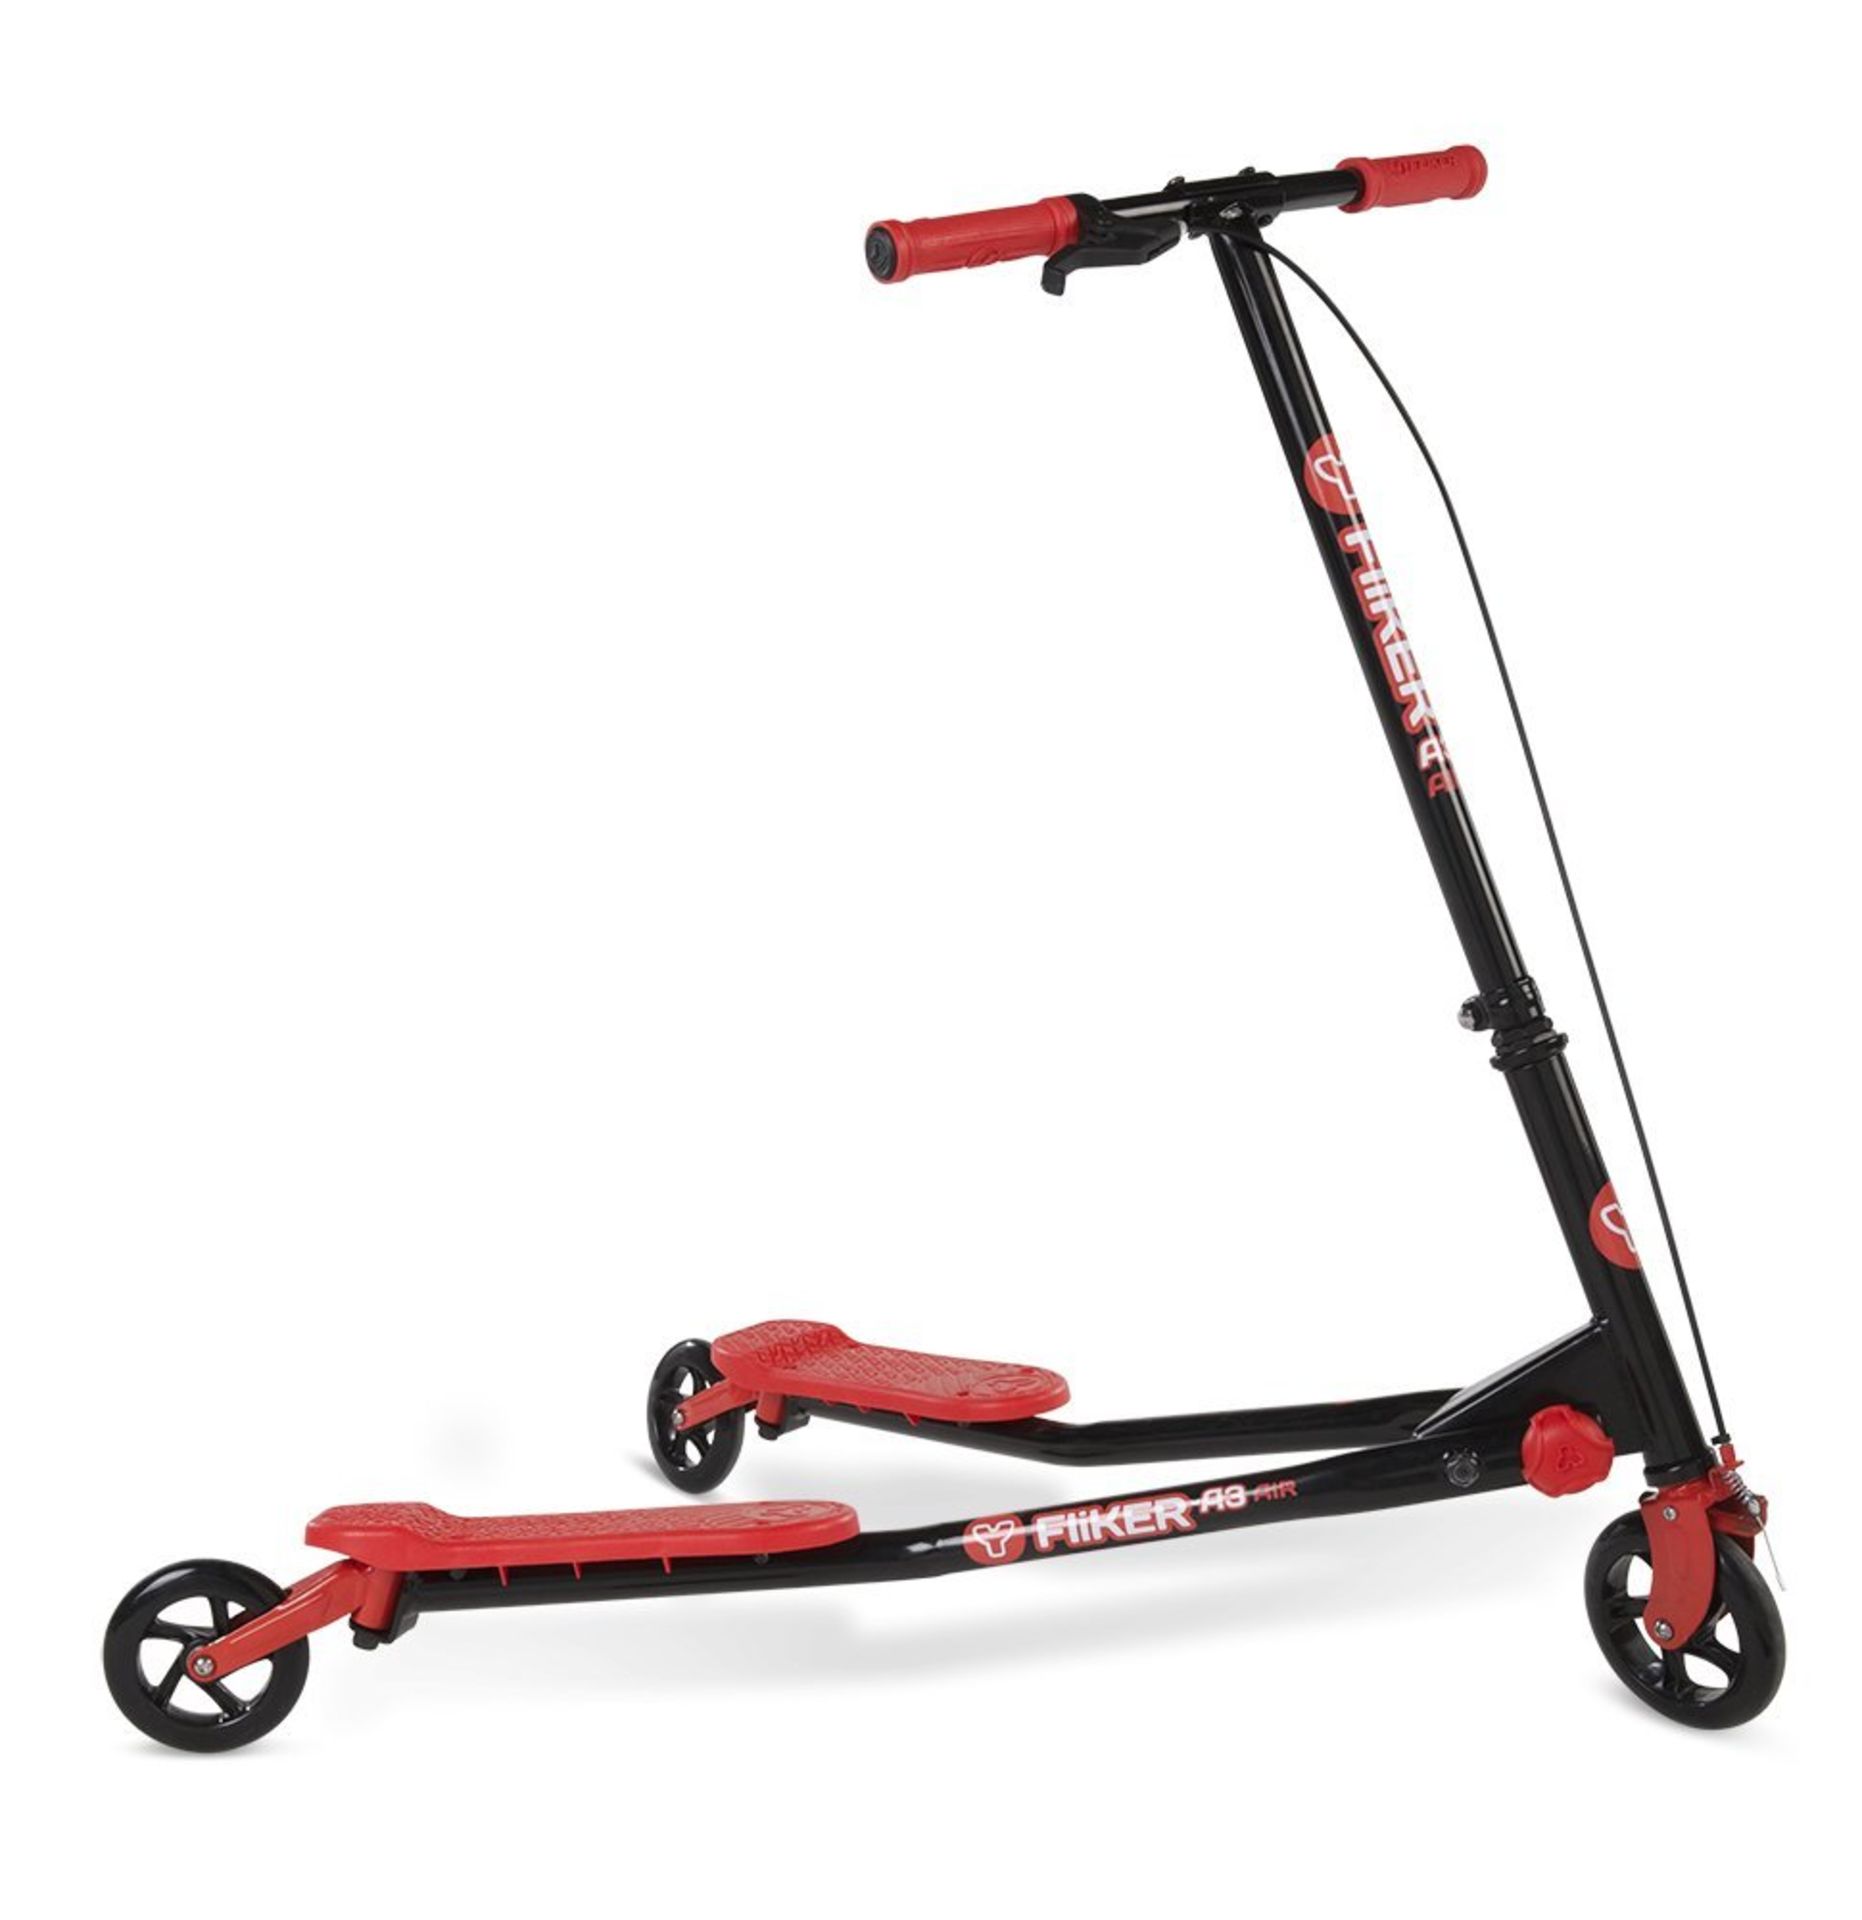 Yvolution Children's Y Kid's Y Fliker Air A3 3 Wheeled Scooter RRP £129.99